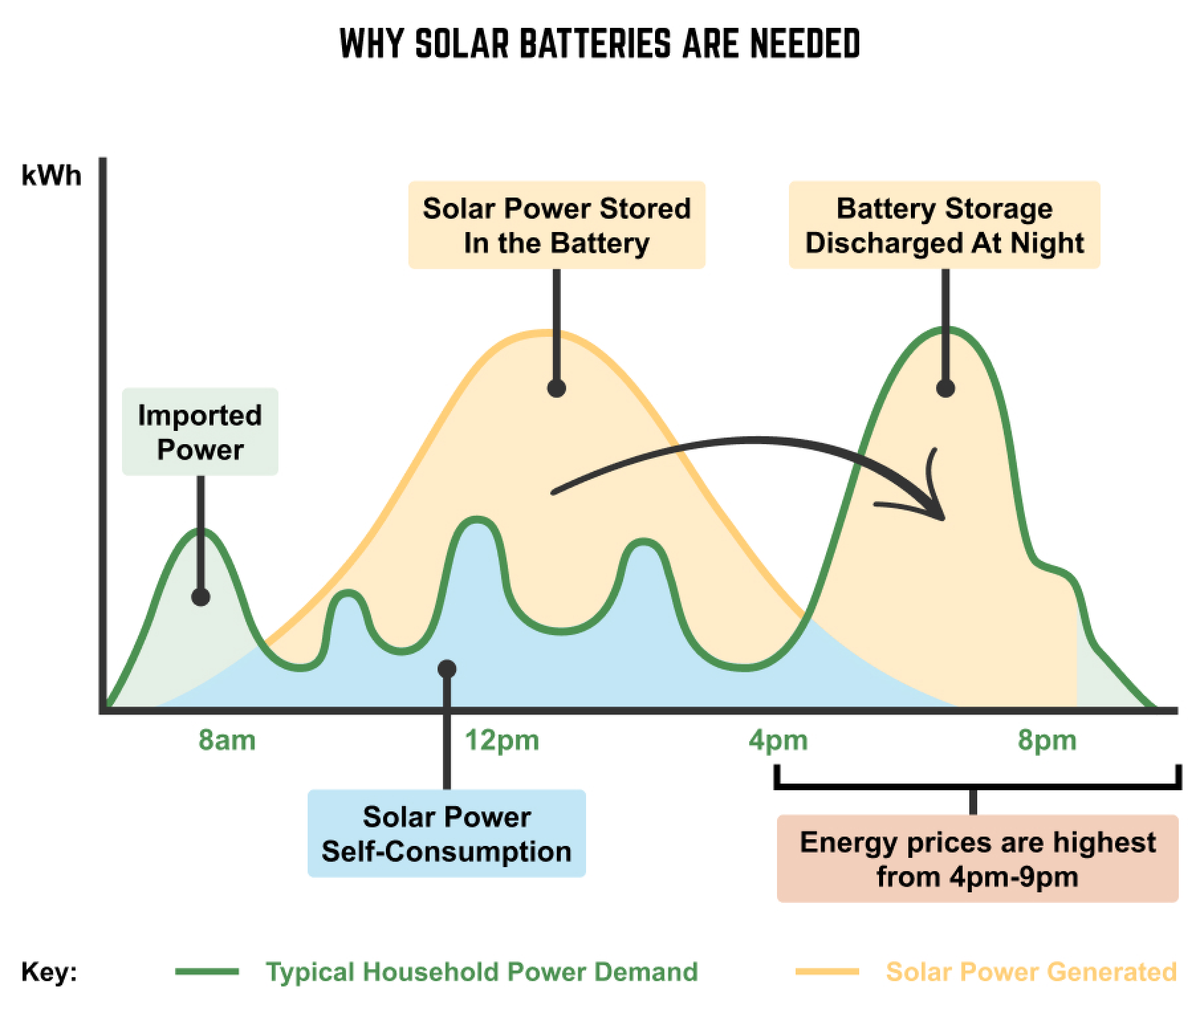 Why solar batteries are needed